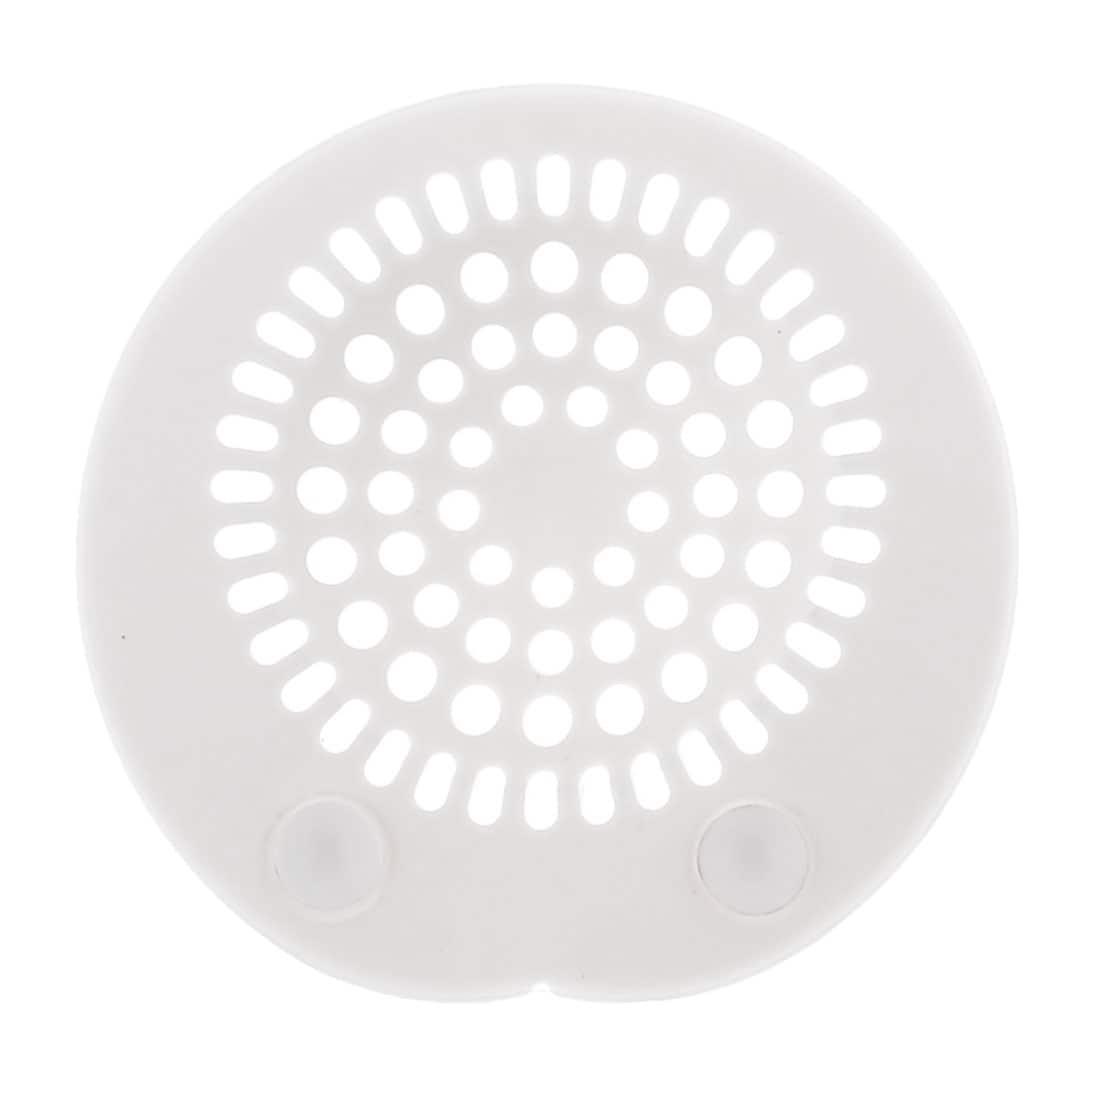 https://ak1.ostkcdn.com/images/products/is/images/direct/6bc48f46b7c1873e92b5e68e67be5c9fa924c8aa/Shower-Bath-Suction-Cup-Hair-Stopper-Floor-Drain-Drainage.jpg